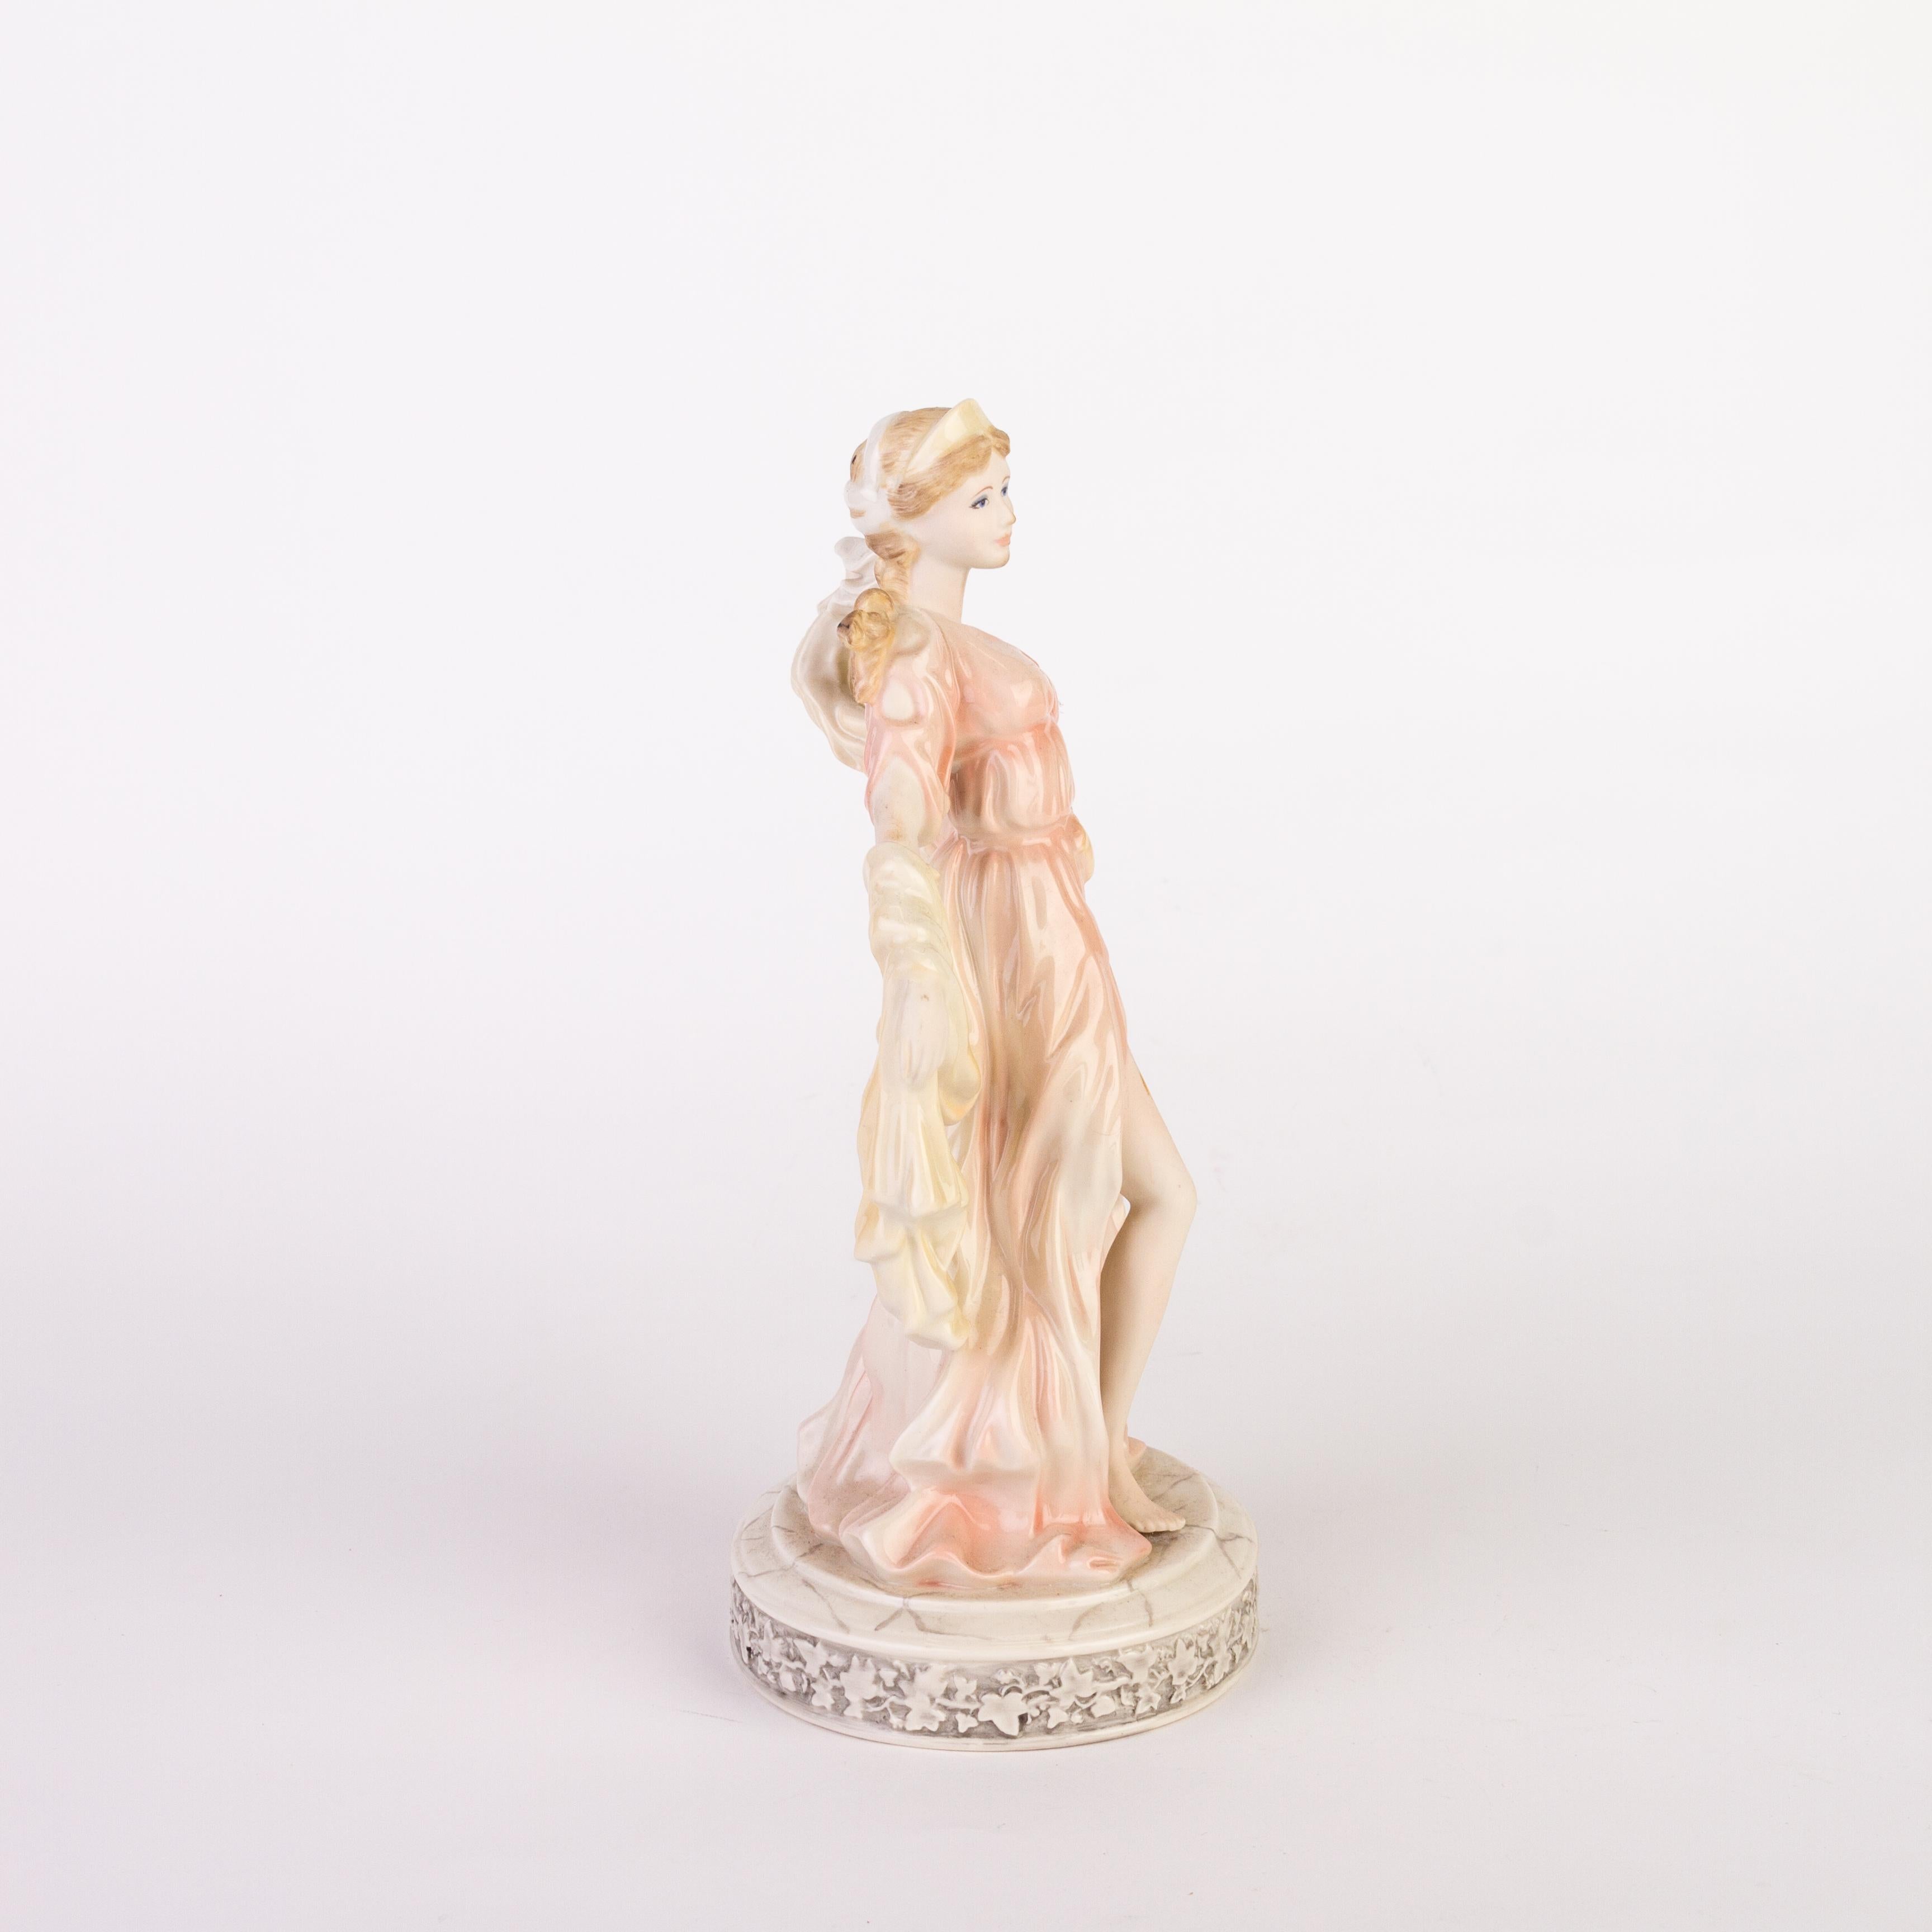 Wedgwood Fine Porcelain Sculpture Signed 
Good condition overall, see photos.
From a private collection.

Free international shipping.